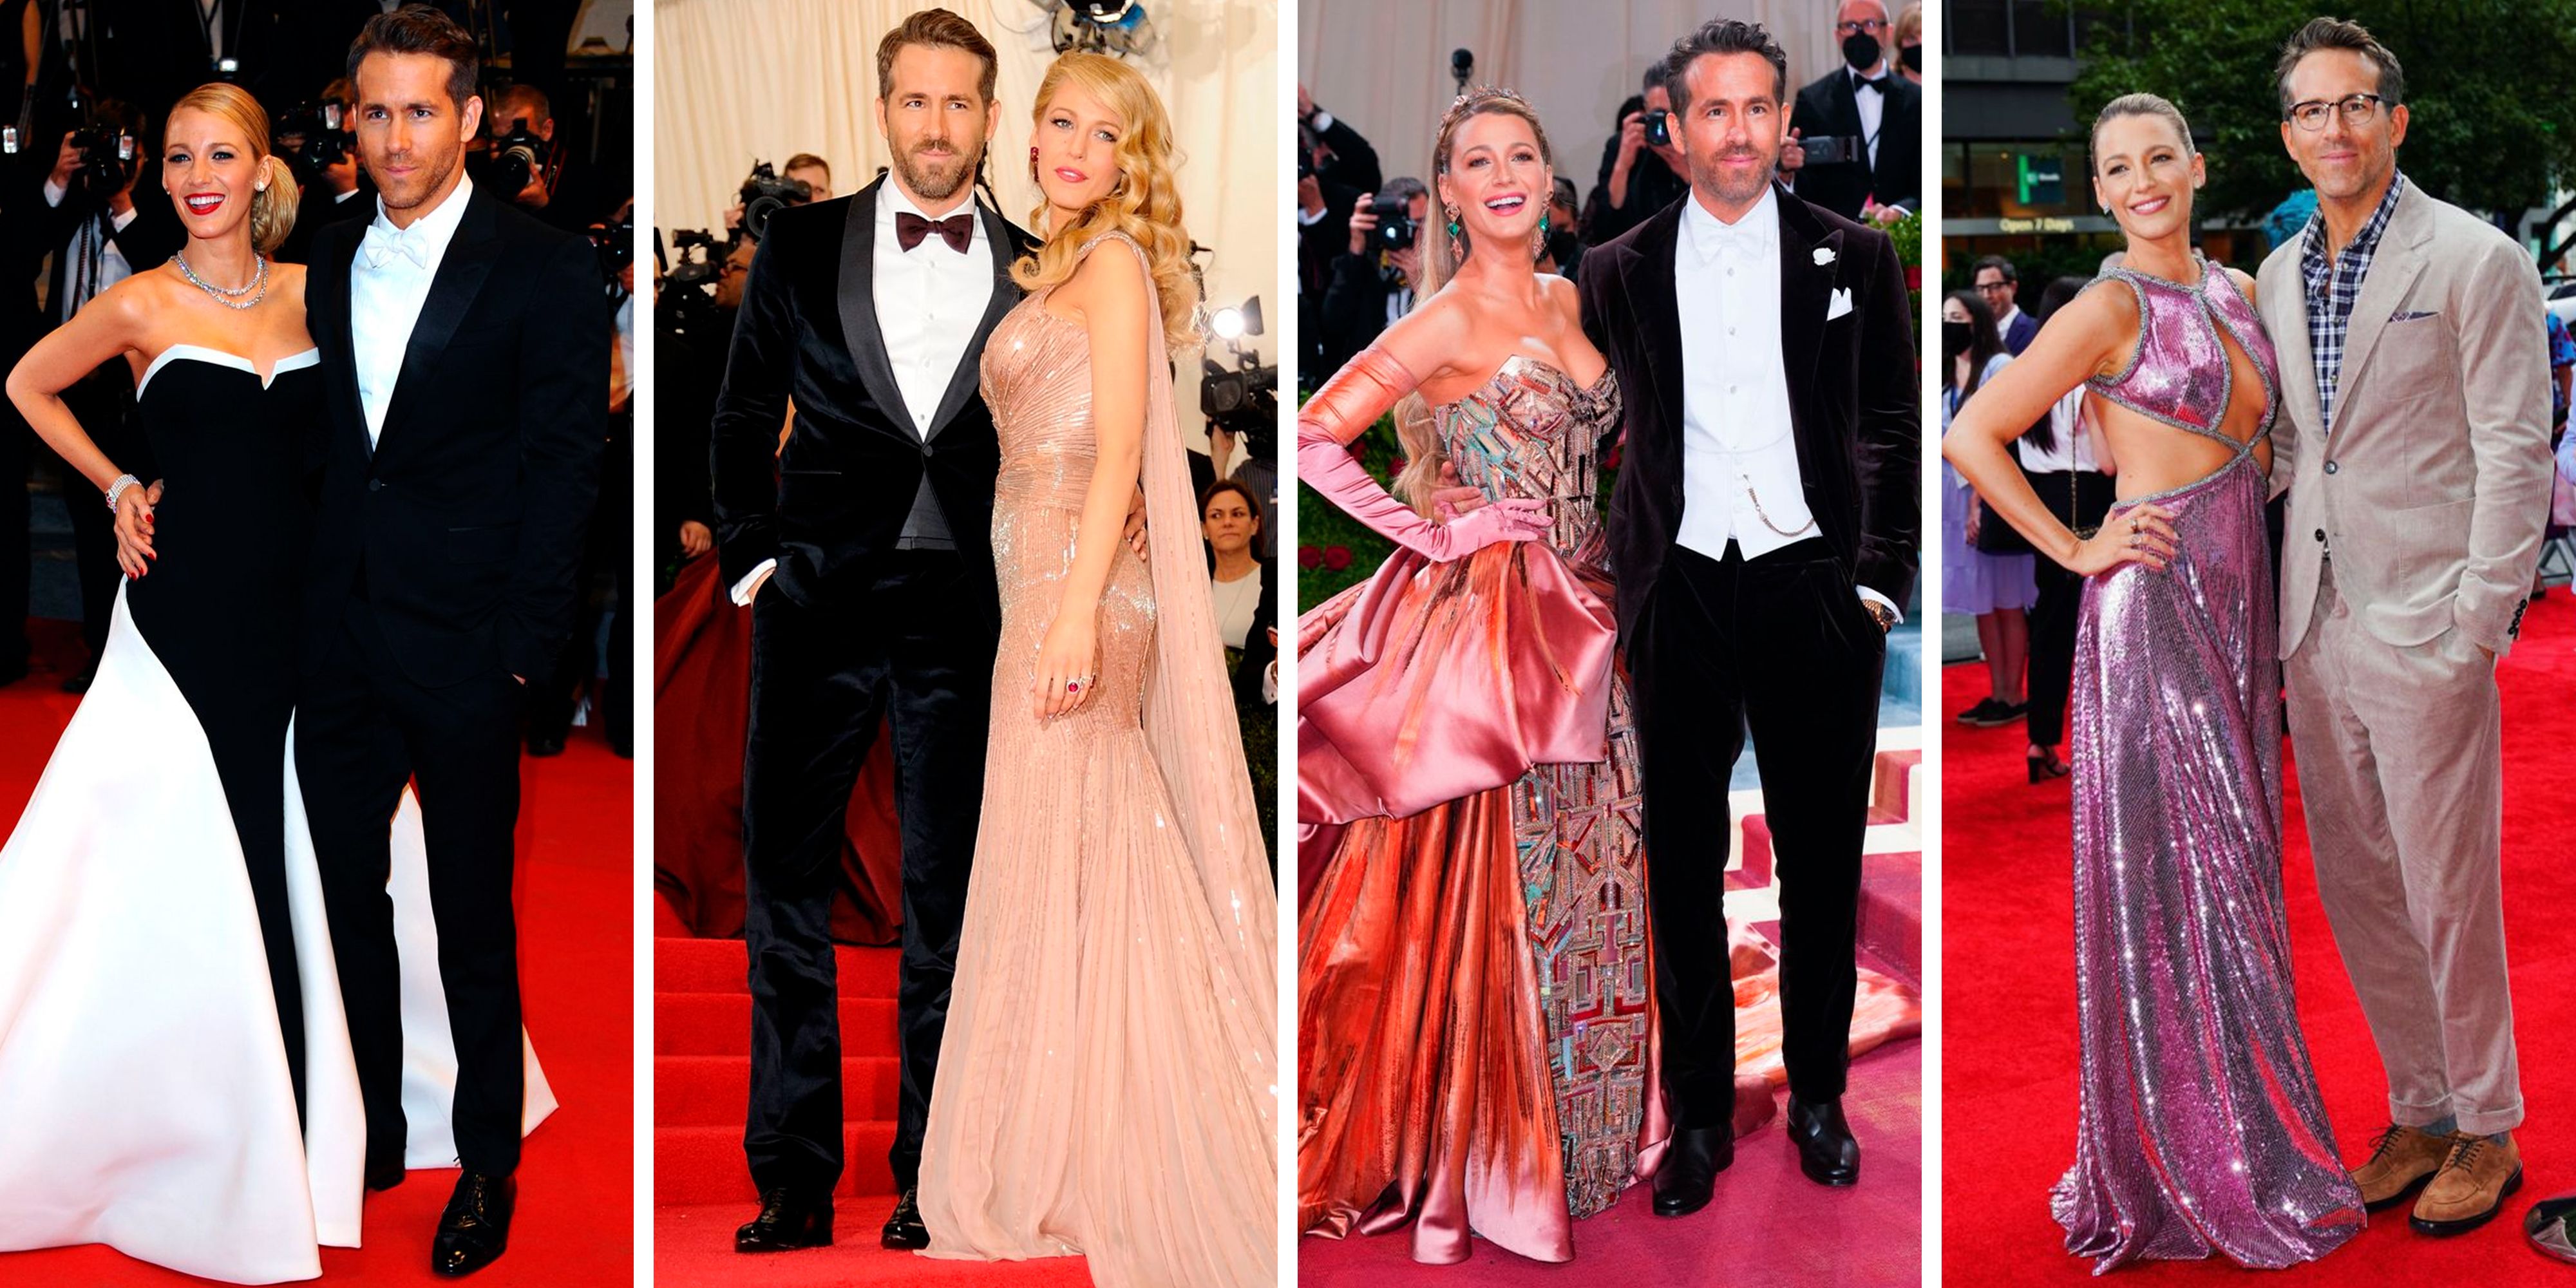 Blake Lively: Her career, red carpet moments and more in photos